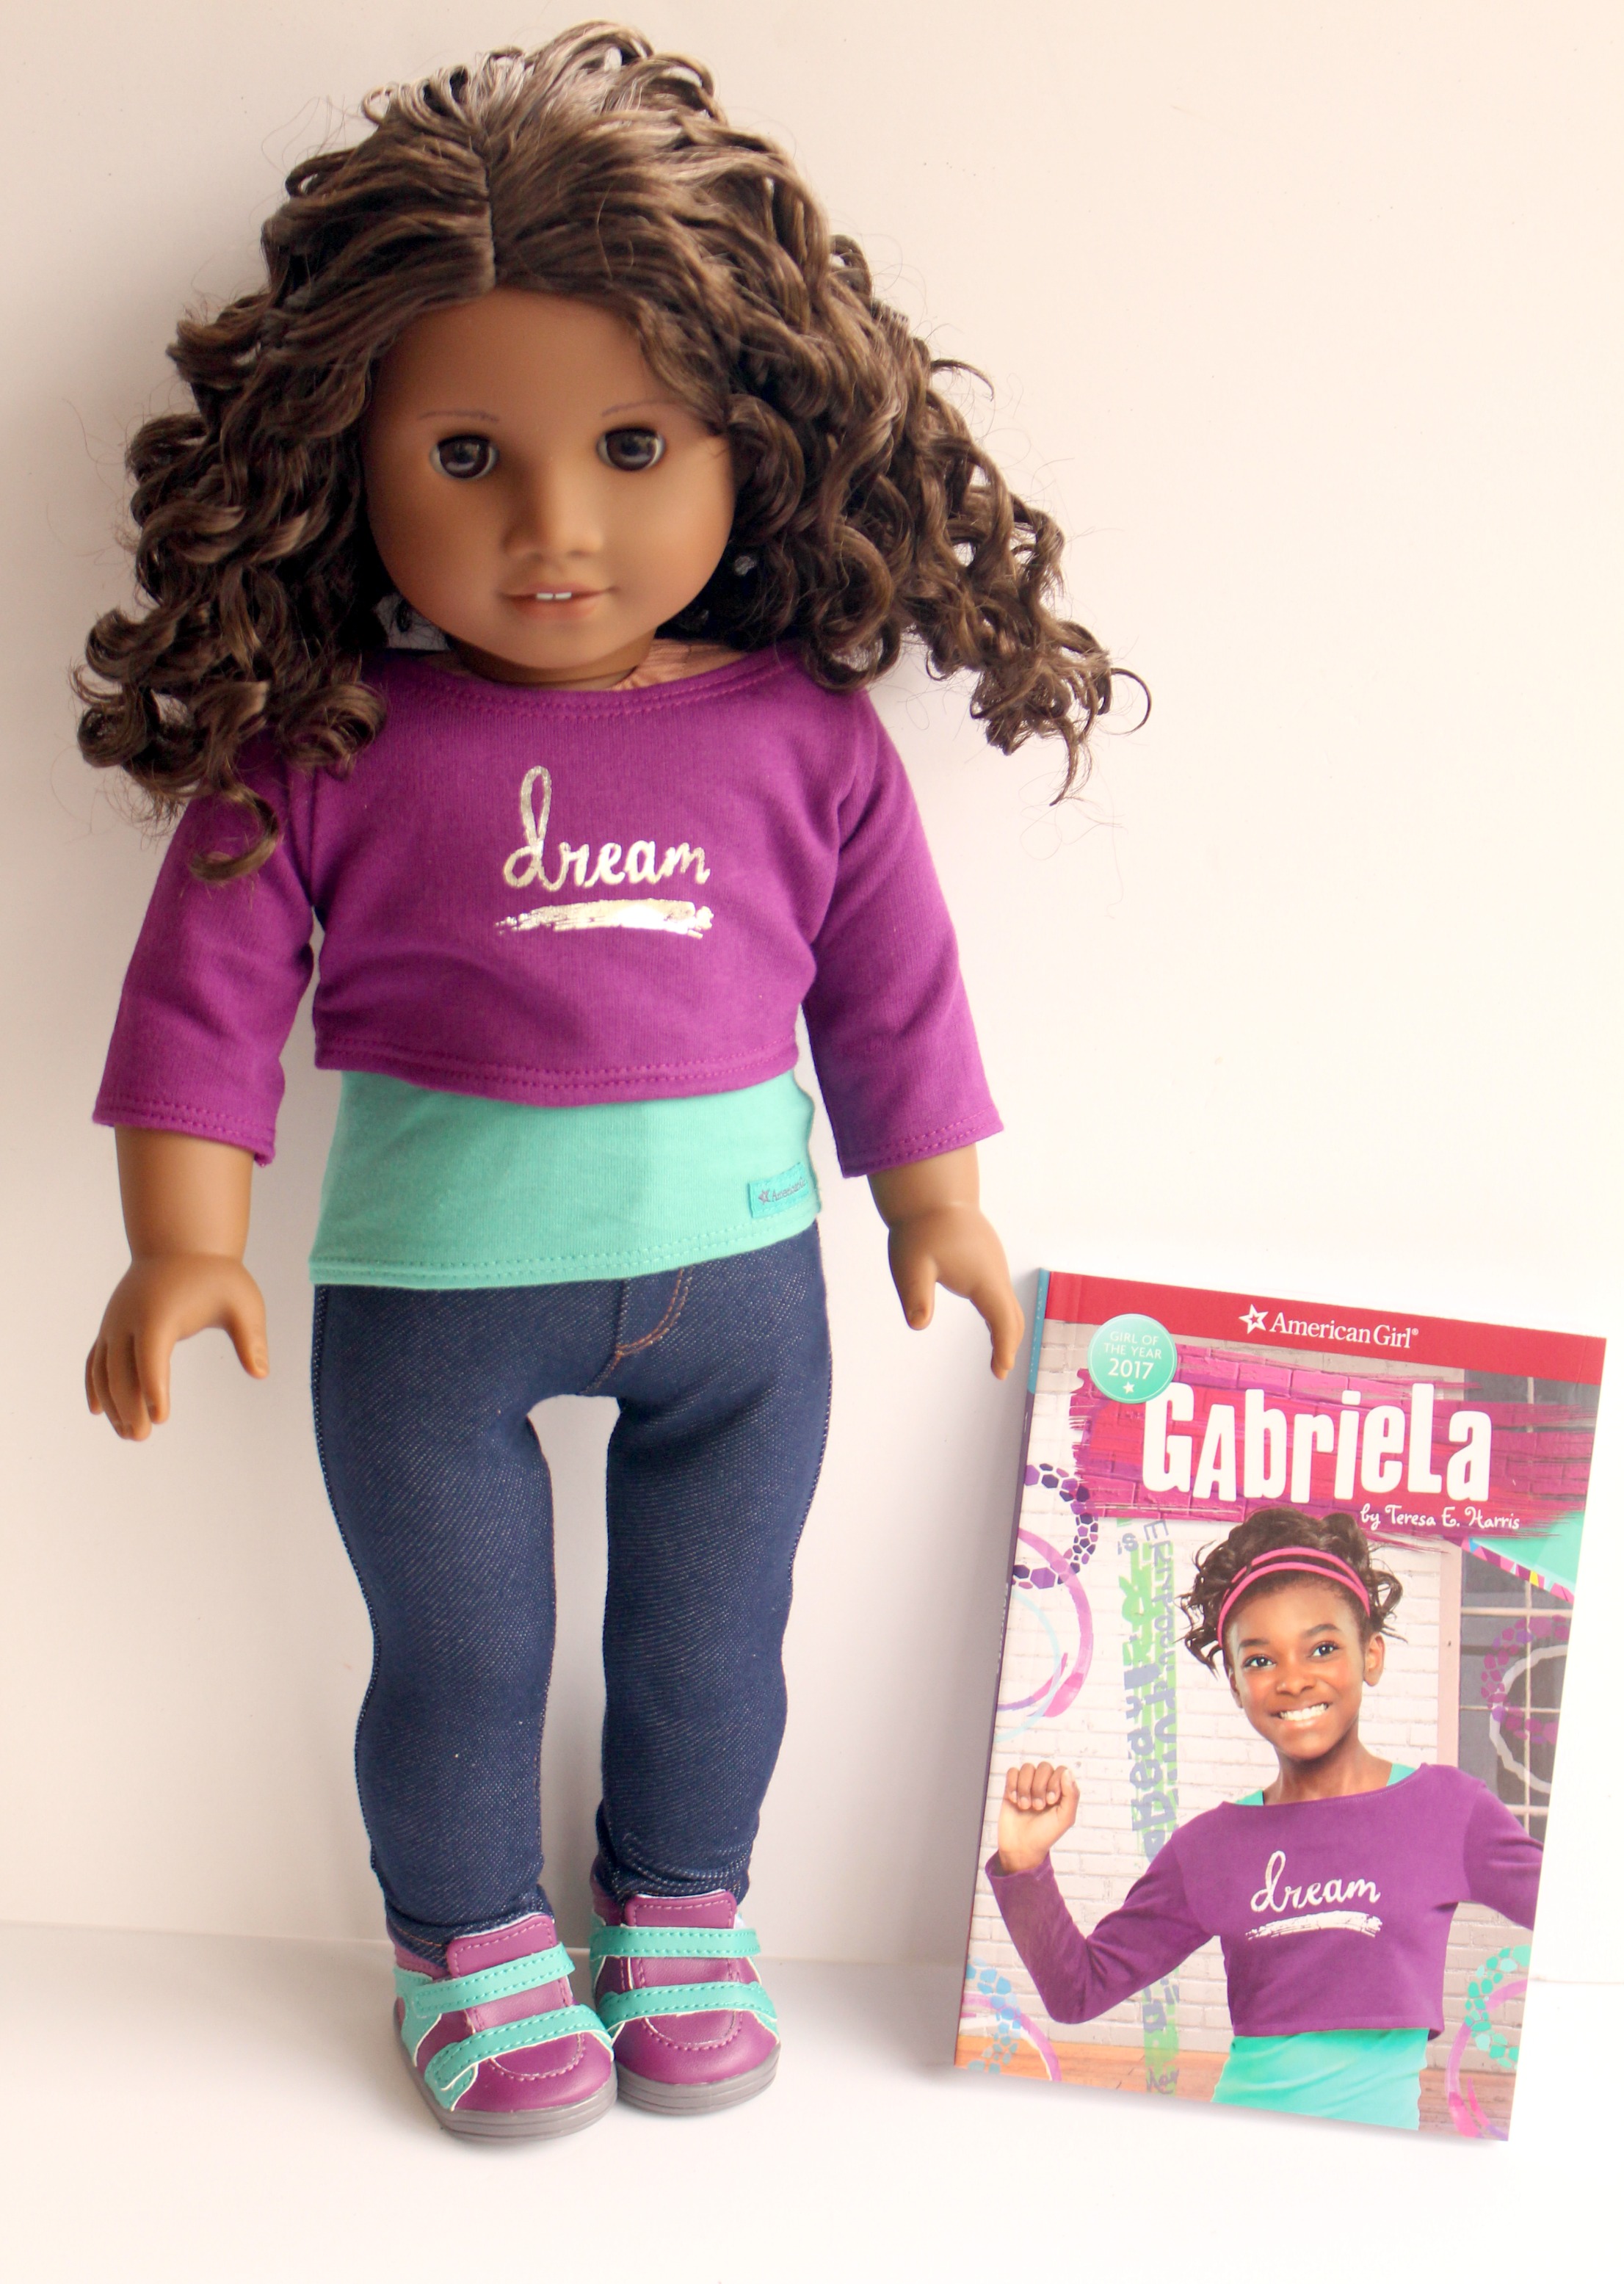 American-Girl-Doll-of-the-year-2017-gabriela-blog-review